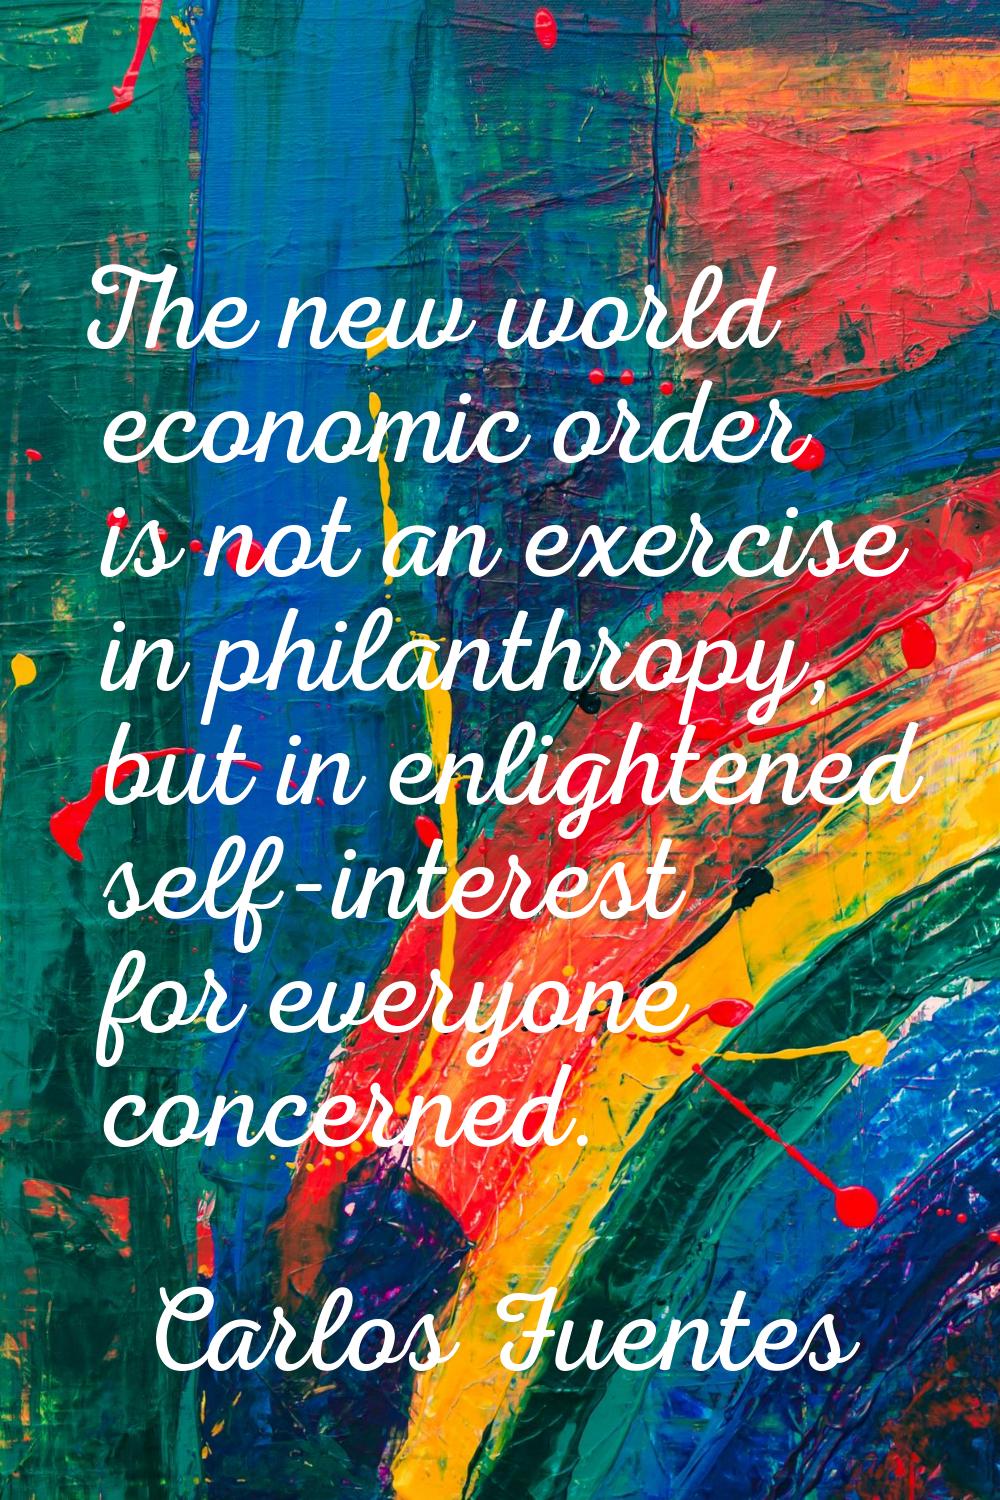 The new world economic order is not an exercise in philanthropy, but in enlightened self-interest f